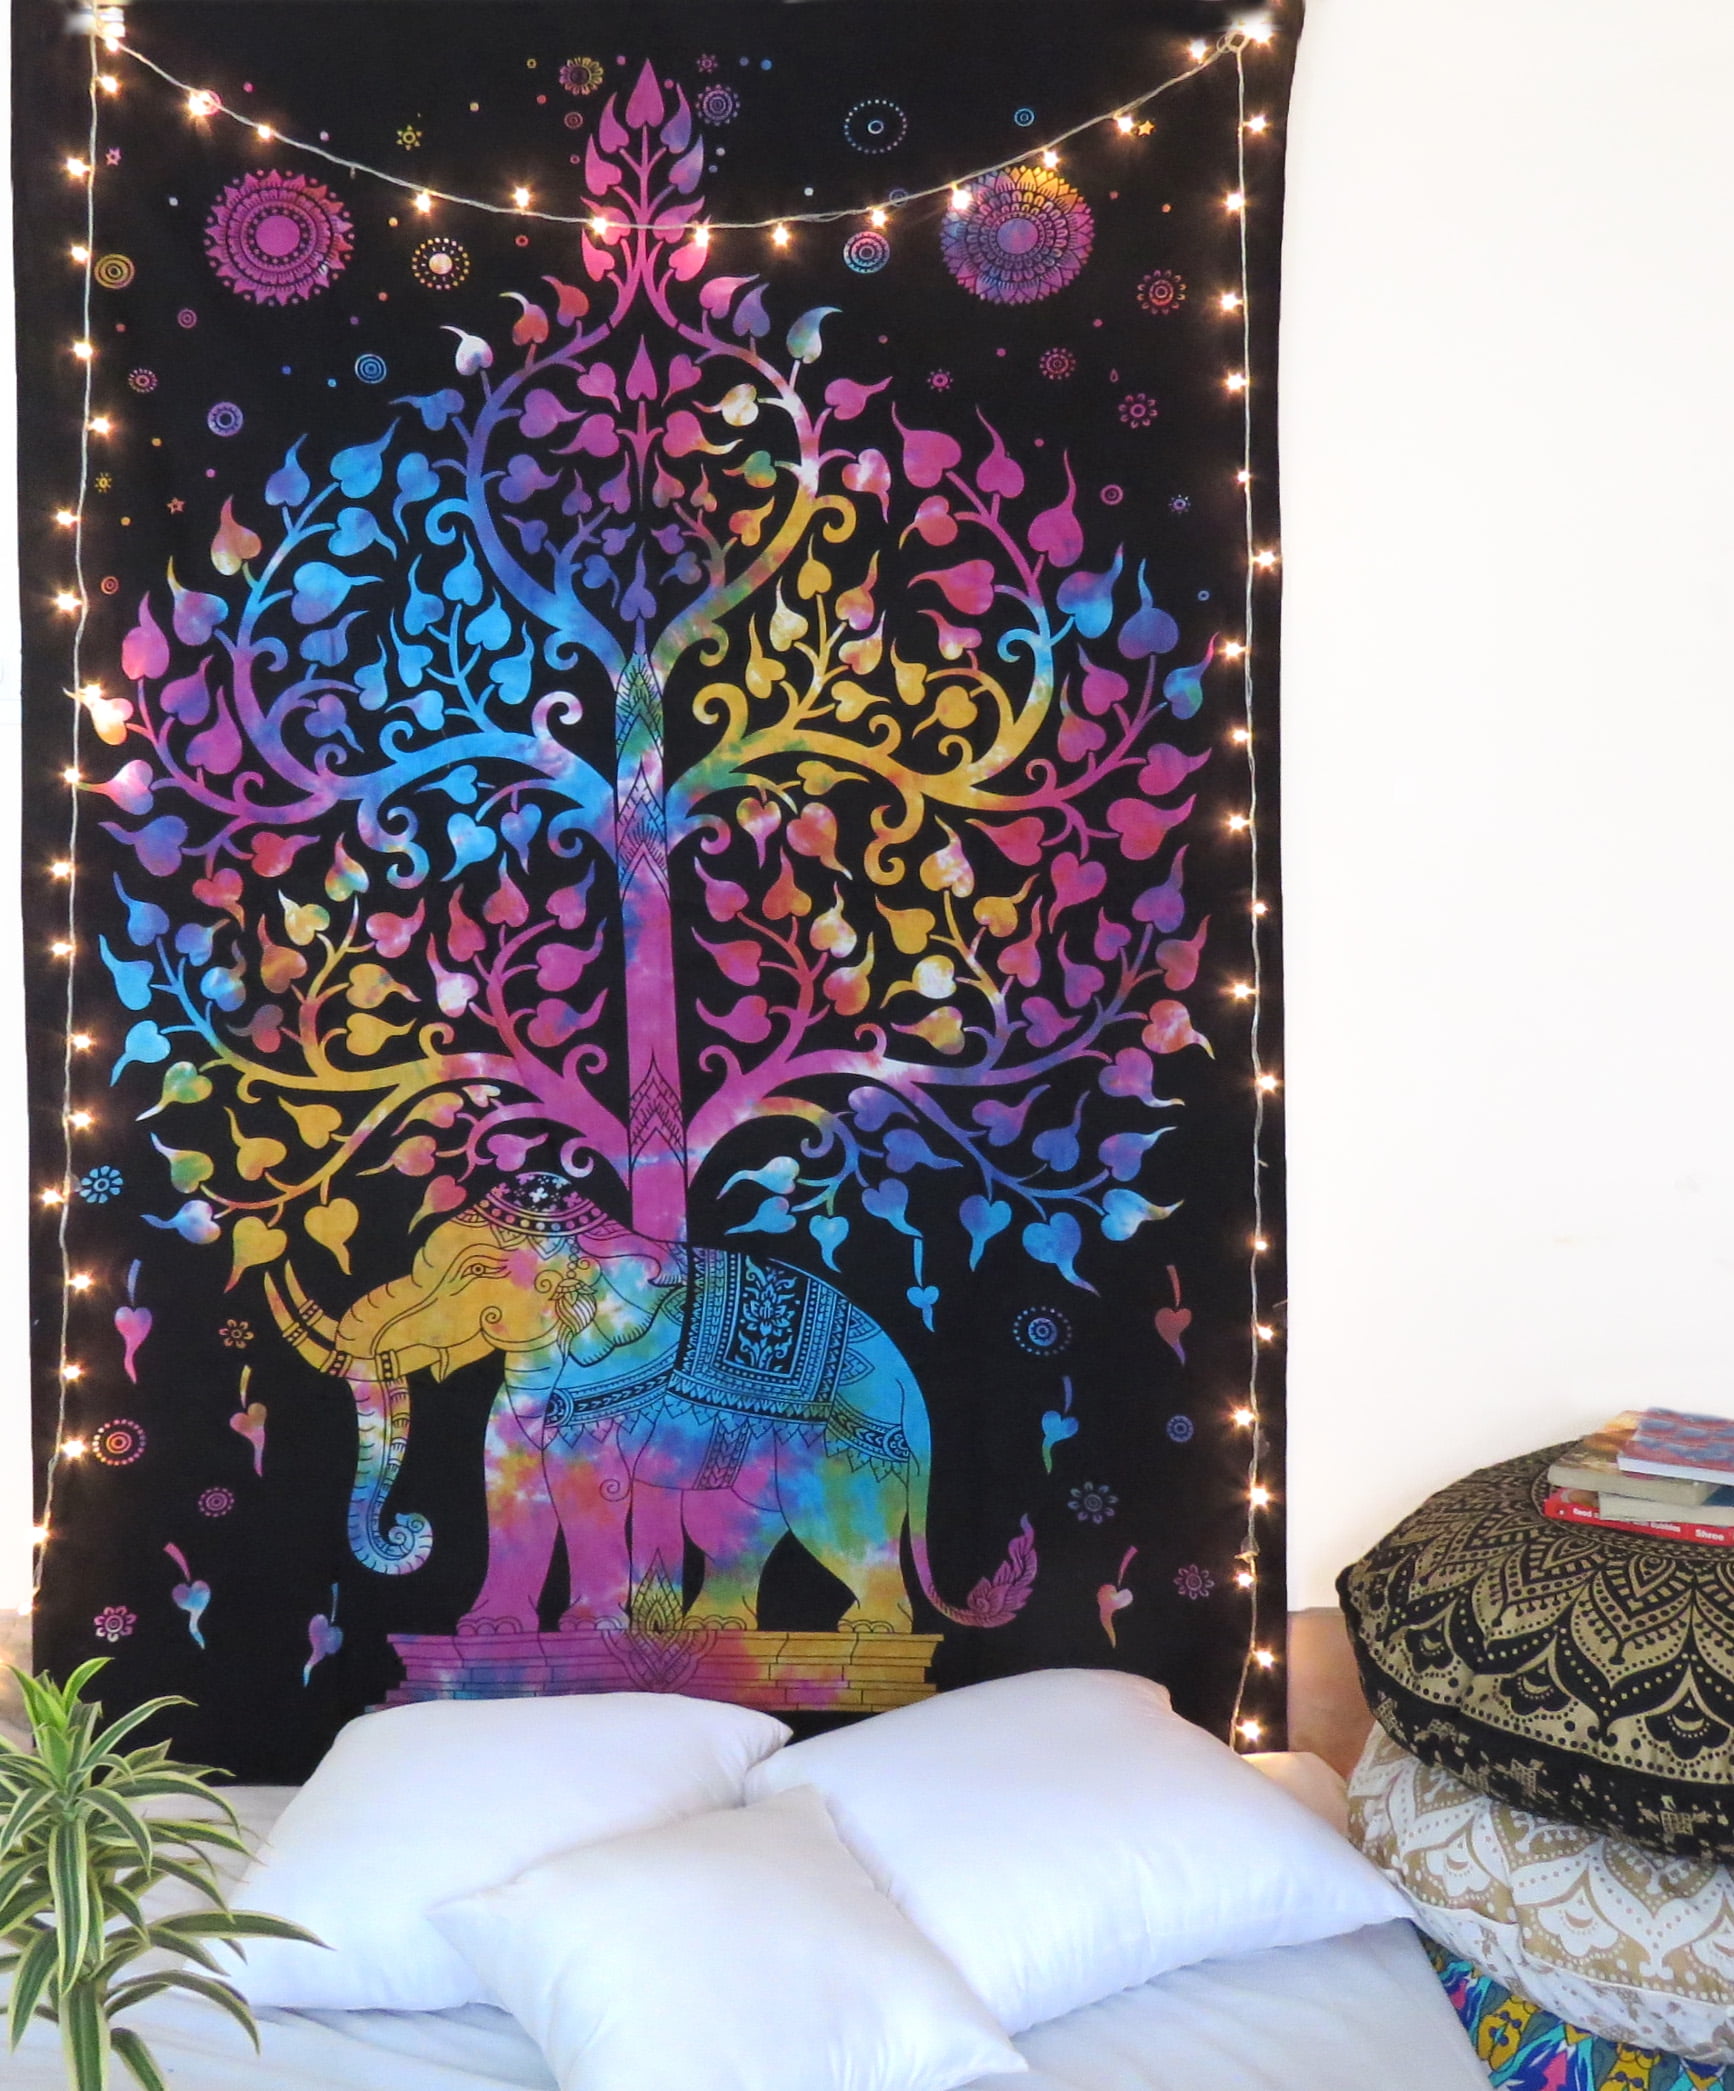 Tie Dye Tapestry Tree of life Wall Hangin Indian Bohemian Hippie Tapestries